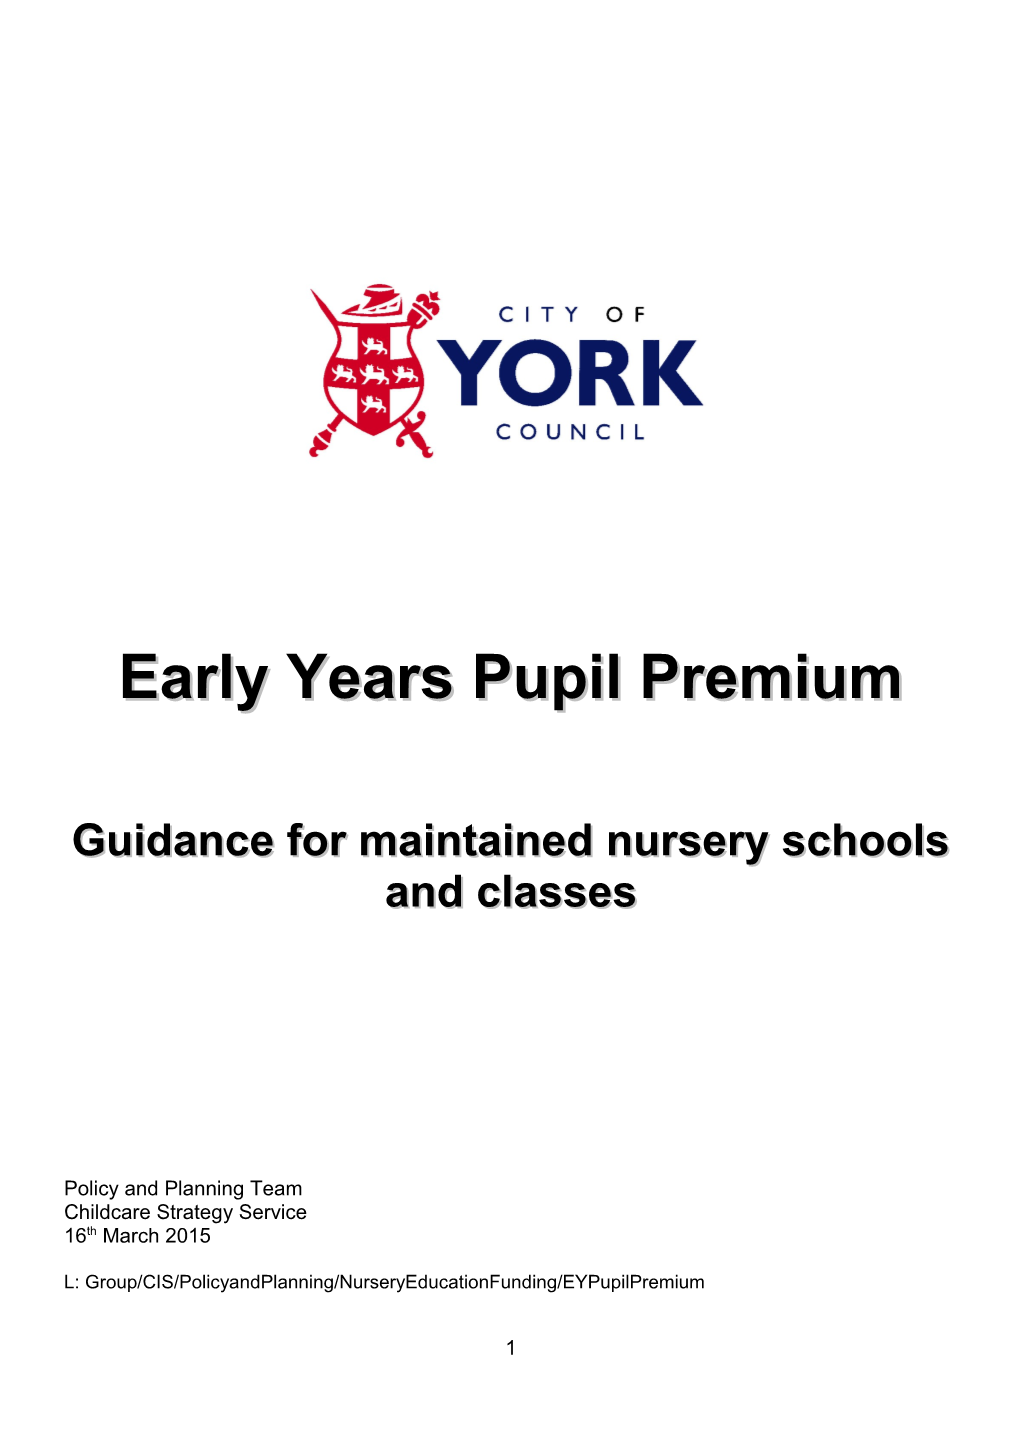 Guidance for Maintained Nursery Schools and Classes